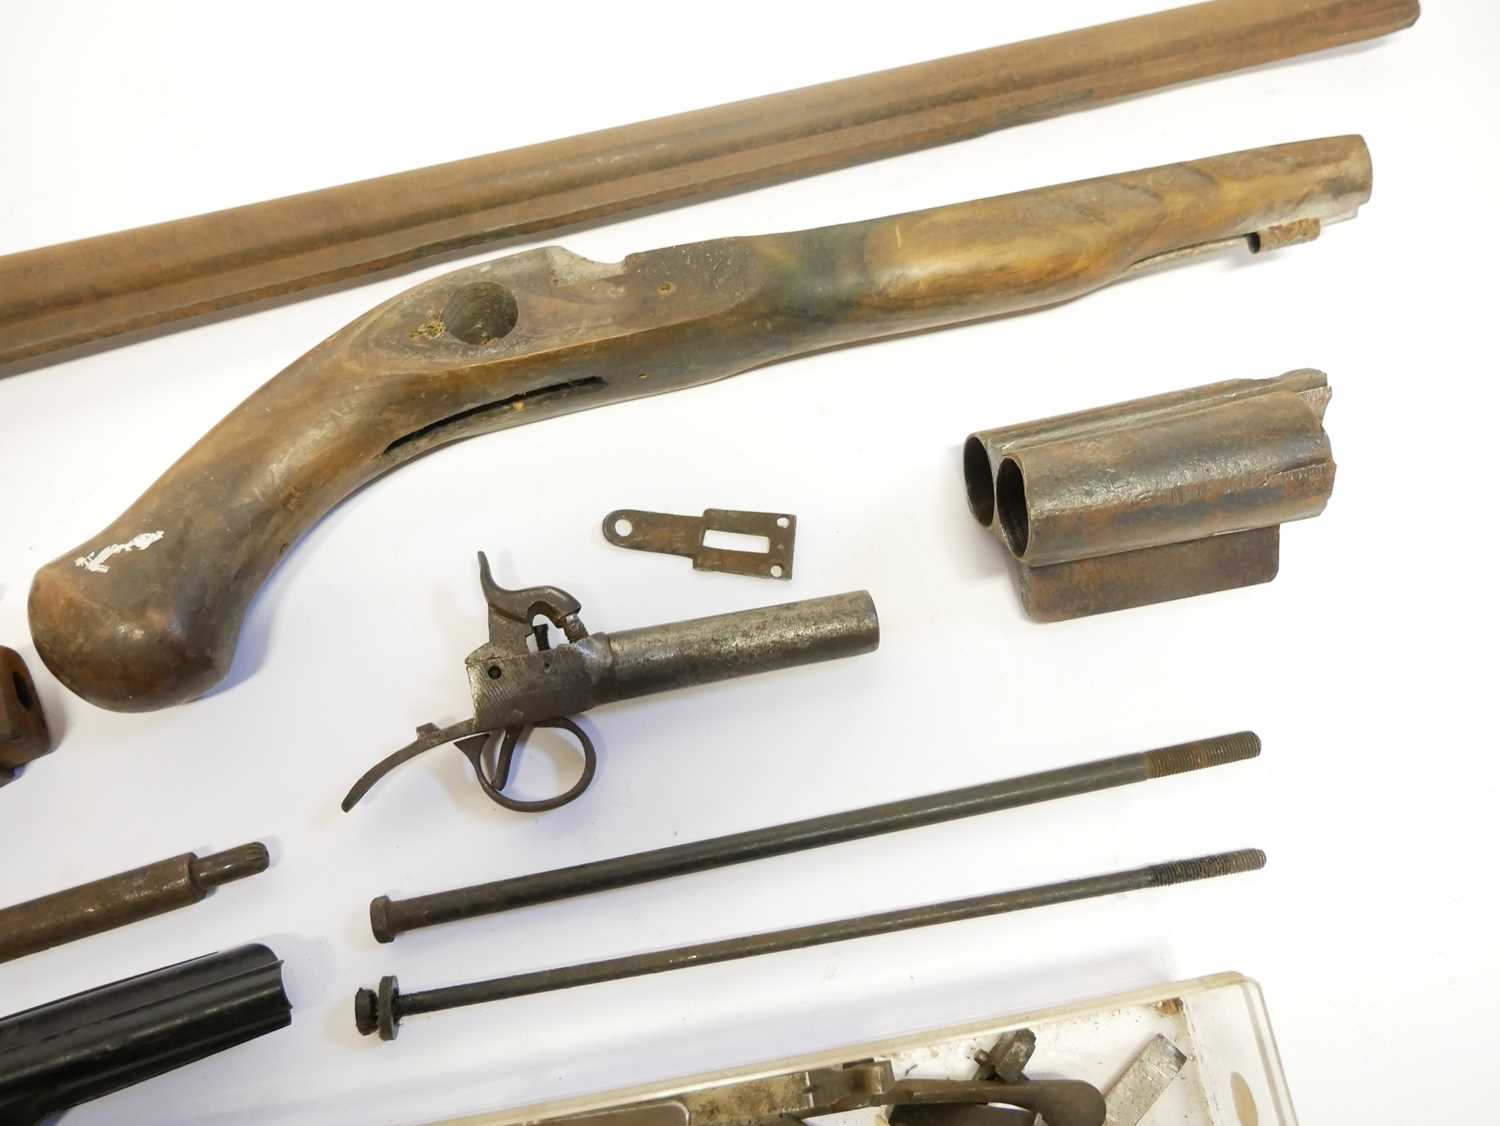 Percussion 14 bore muzzle-loading shotgun by Marigold for restoration together with a collection - Bild 3 aus 11